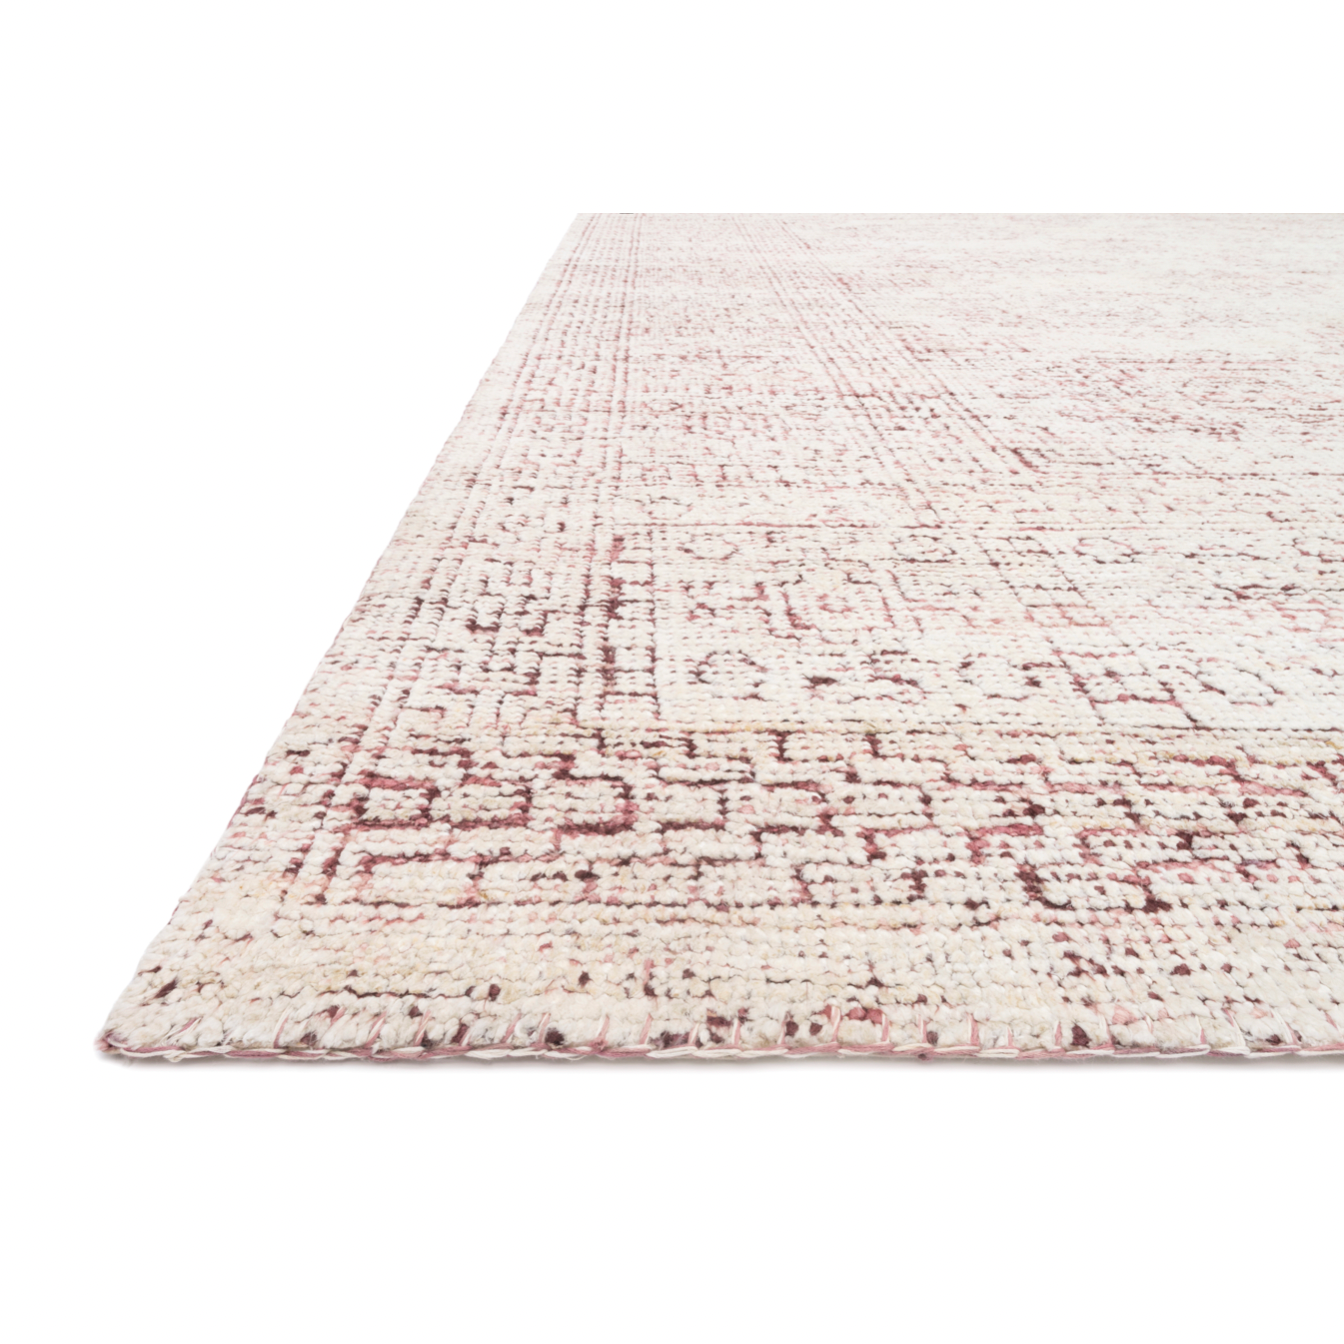 Hand-knotted in India of viscose and cotton, the Vestige White / Berry Area Rug recalls ancient khotan rugs in an updated color palette. Soft underfoot, the silken yarns temper the graphic motifs to create a versatile foundation.  Hand Knotted 93% Viscose | 7% Cotton VQ-01 White / Berry